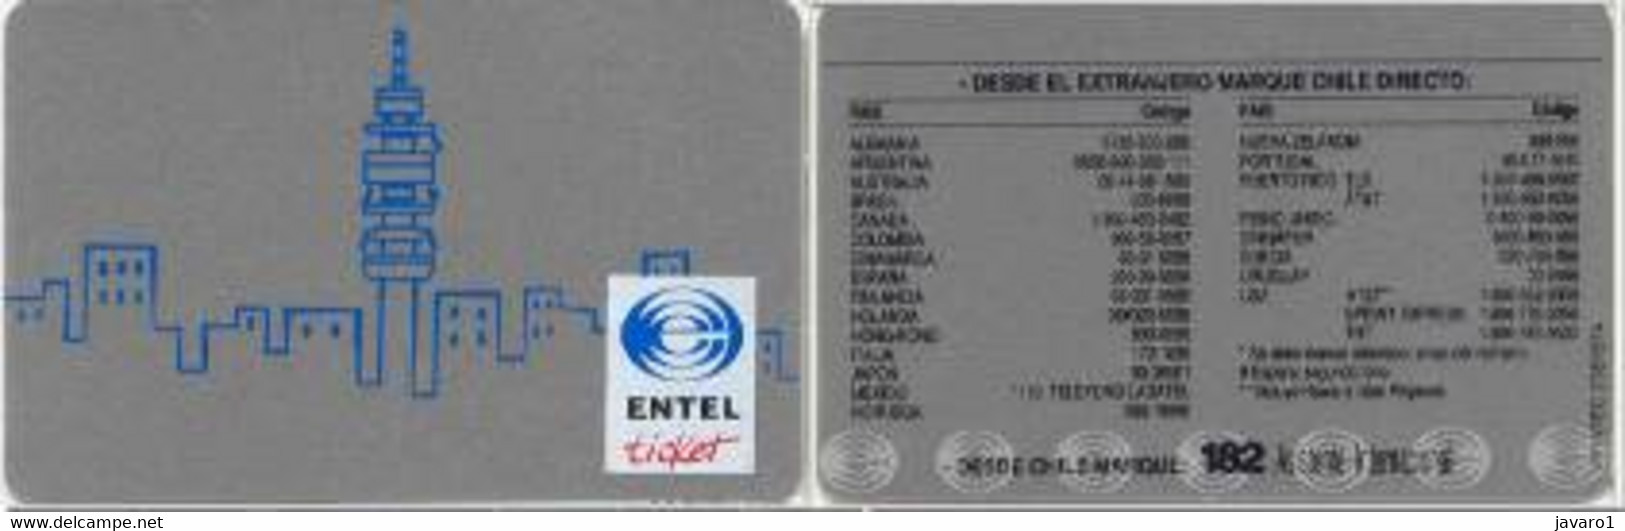 CHILI : CHLREM1 Radio Tower ENTEL TICKET (access Codes) USED - Chile